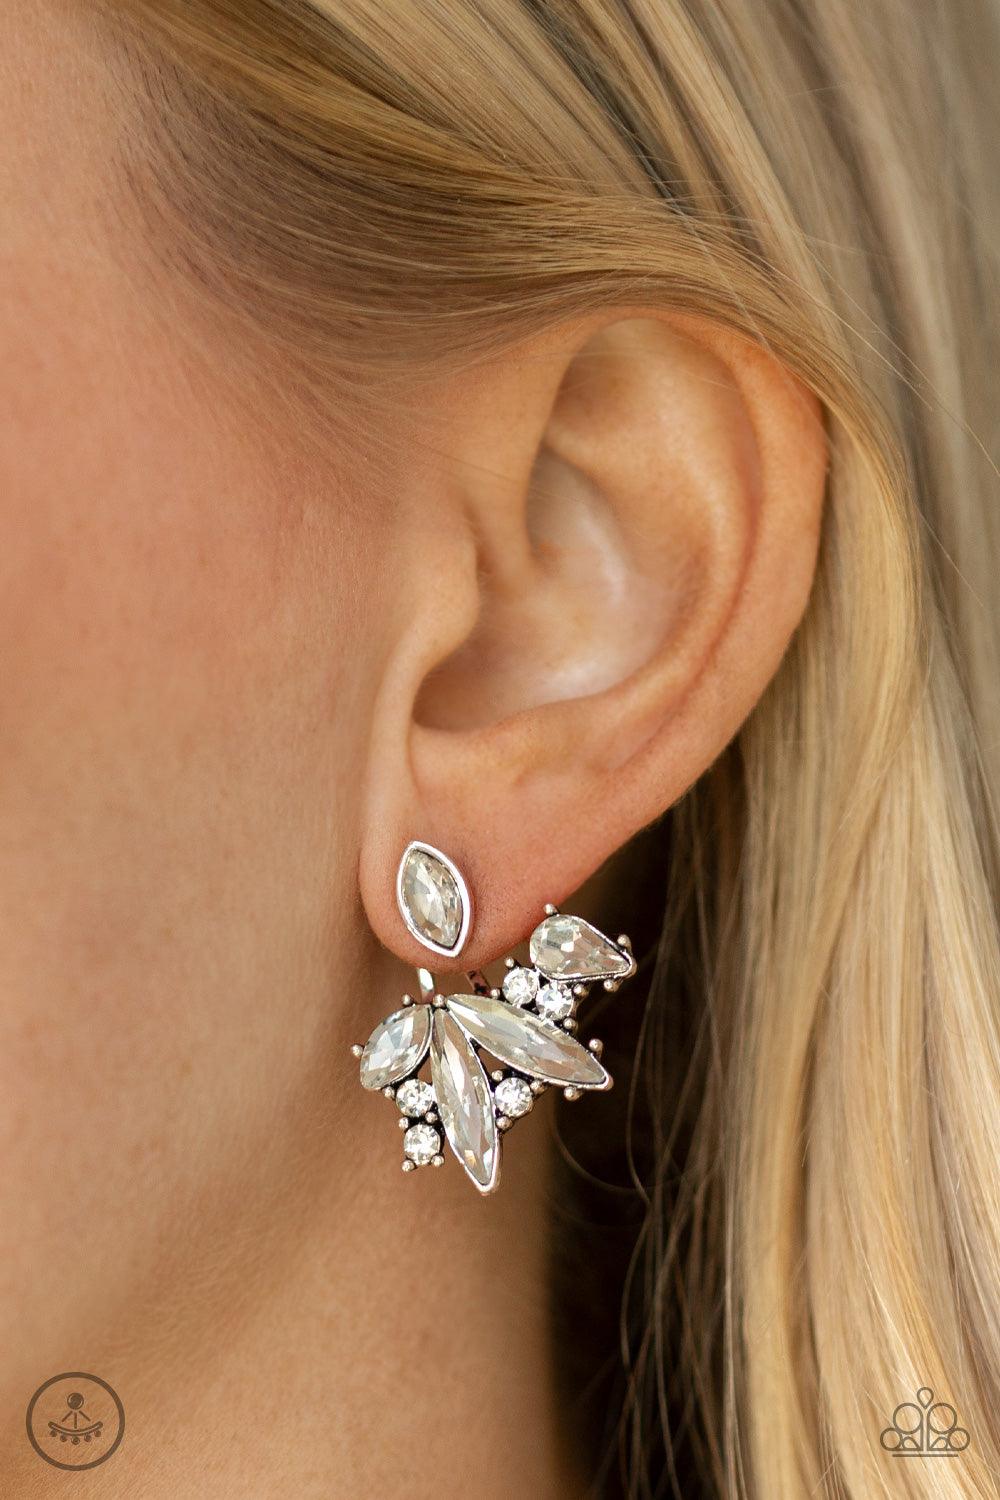 Paparazzi Accessories Deco Dynamite - White A solitaire white marquise cut rhinestone attaches to a double-sided post, designed to fasten behind the ear. Encrusted in a collision of mismatched white rhinestones, a double-sided post peeks out beneath the e